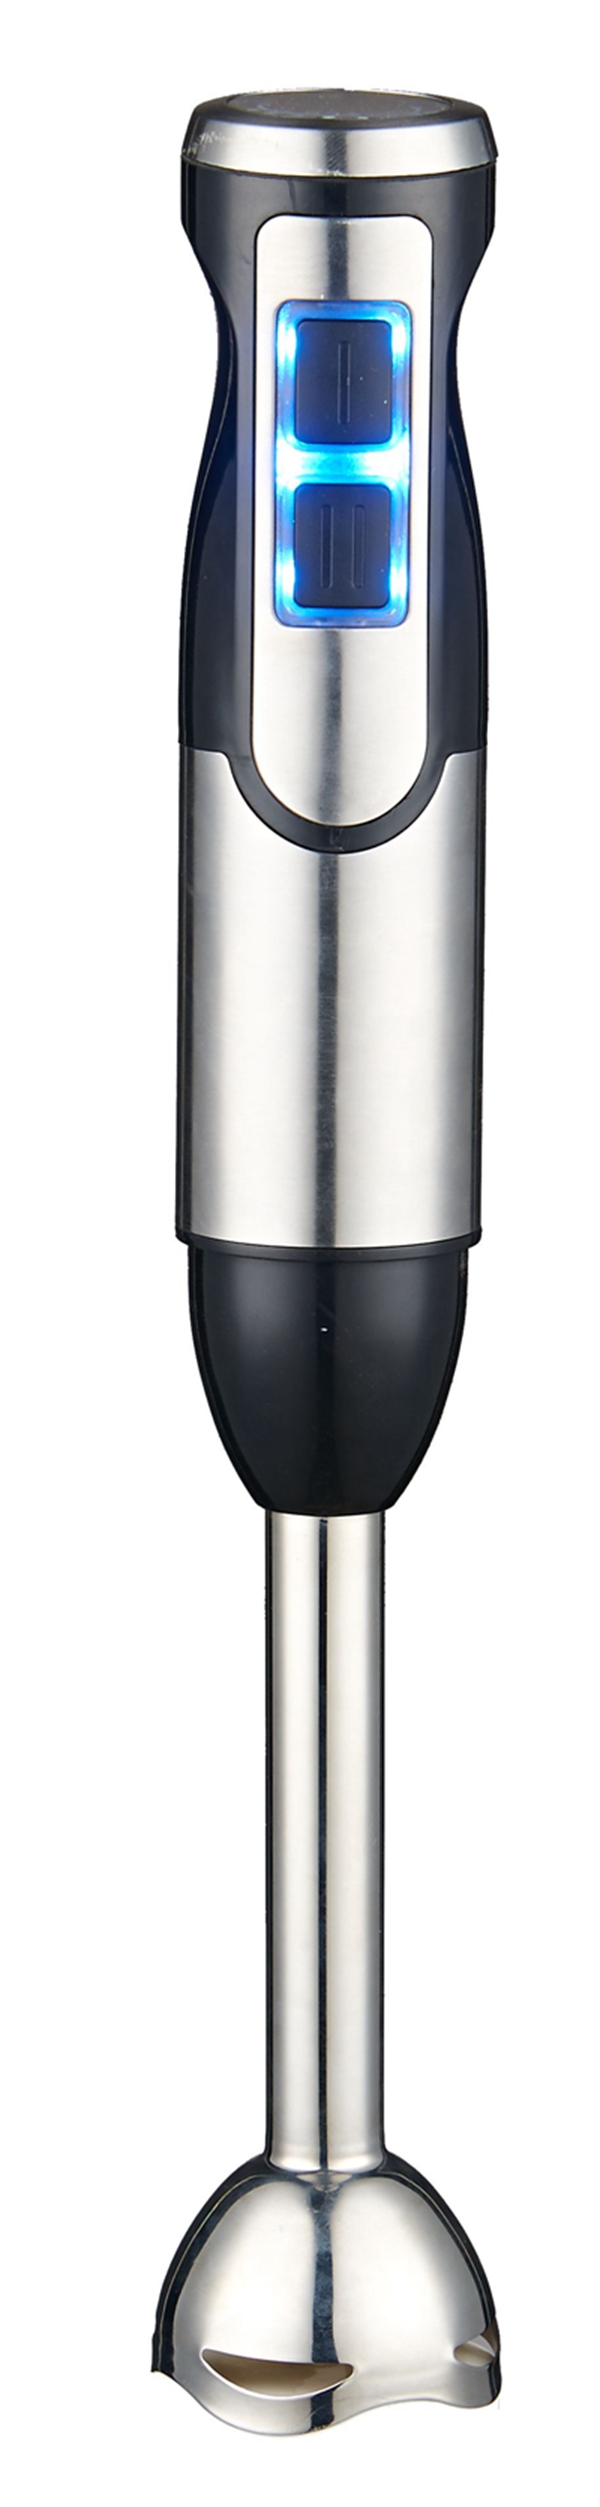 High Quality Electric Blender With Detachable S.S Mixing Stick And Ergommically Designed Handle